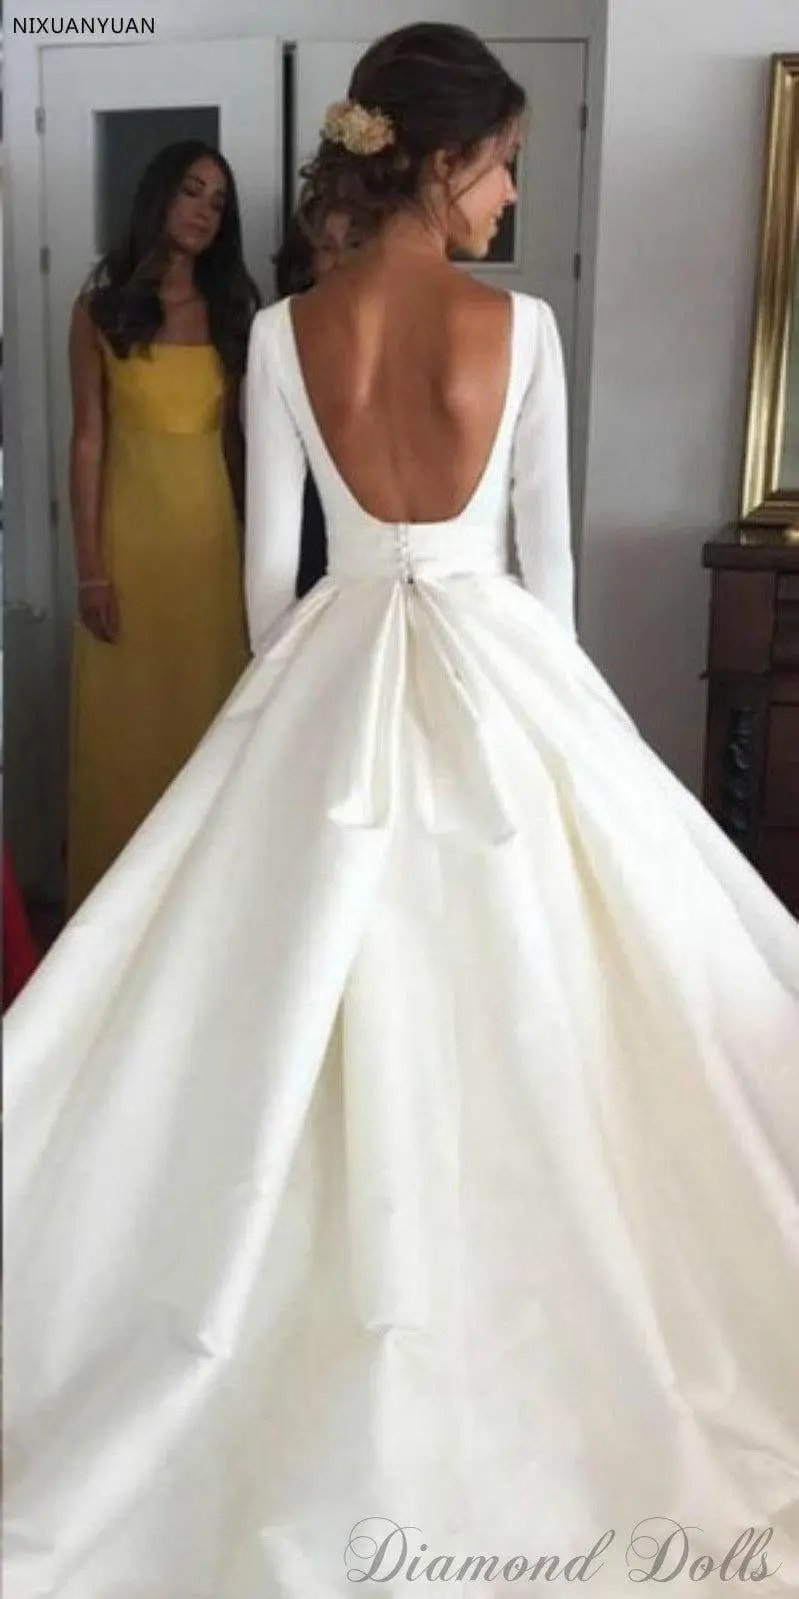 2022 Backless Wedding Dresses Bll Gown Vintage Scoop Long Sleeves Satin Bridal Gown Open Back - Luxurious Weddings